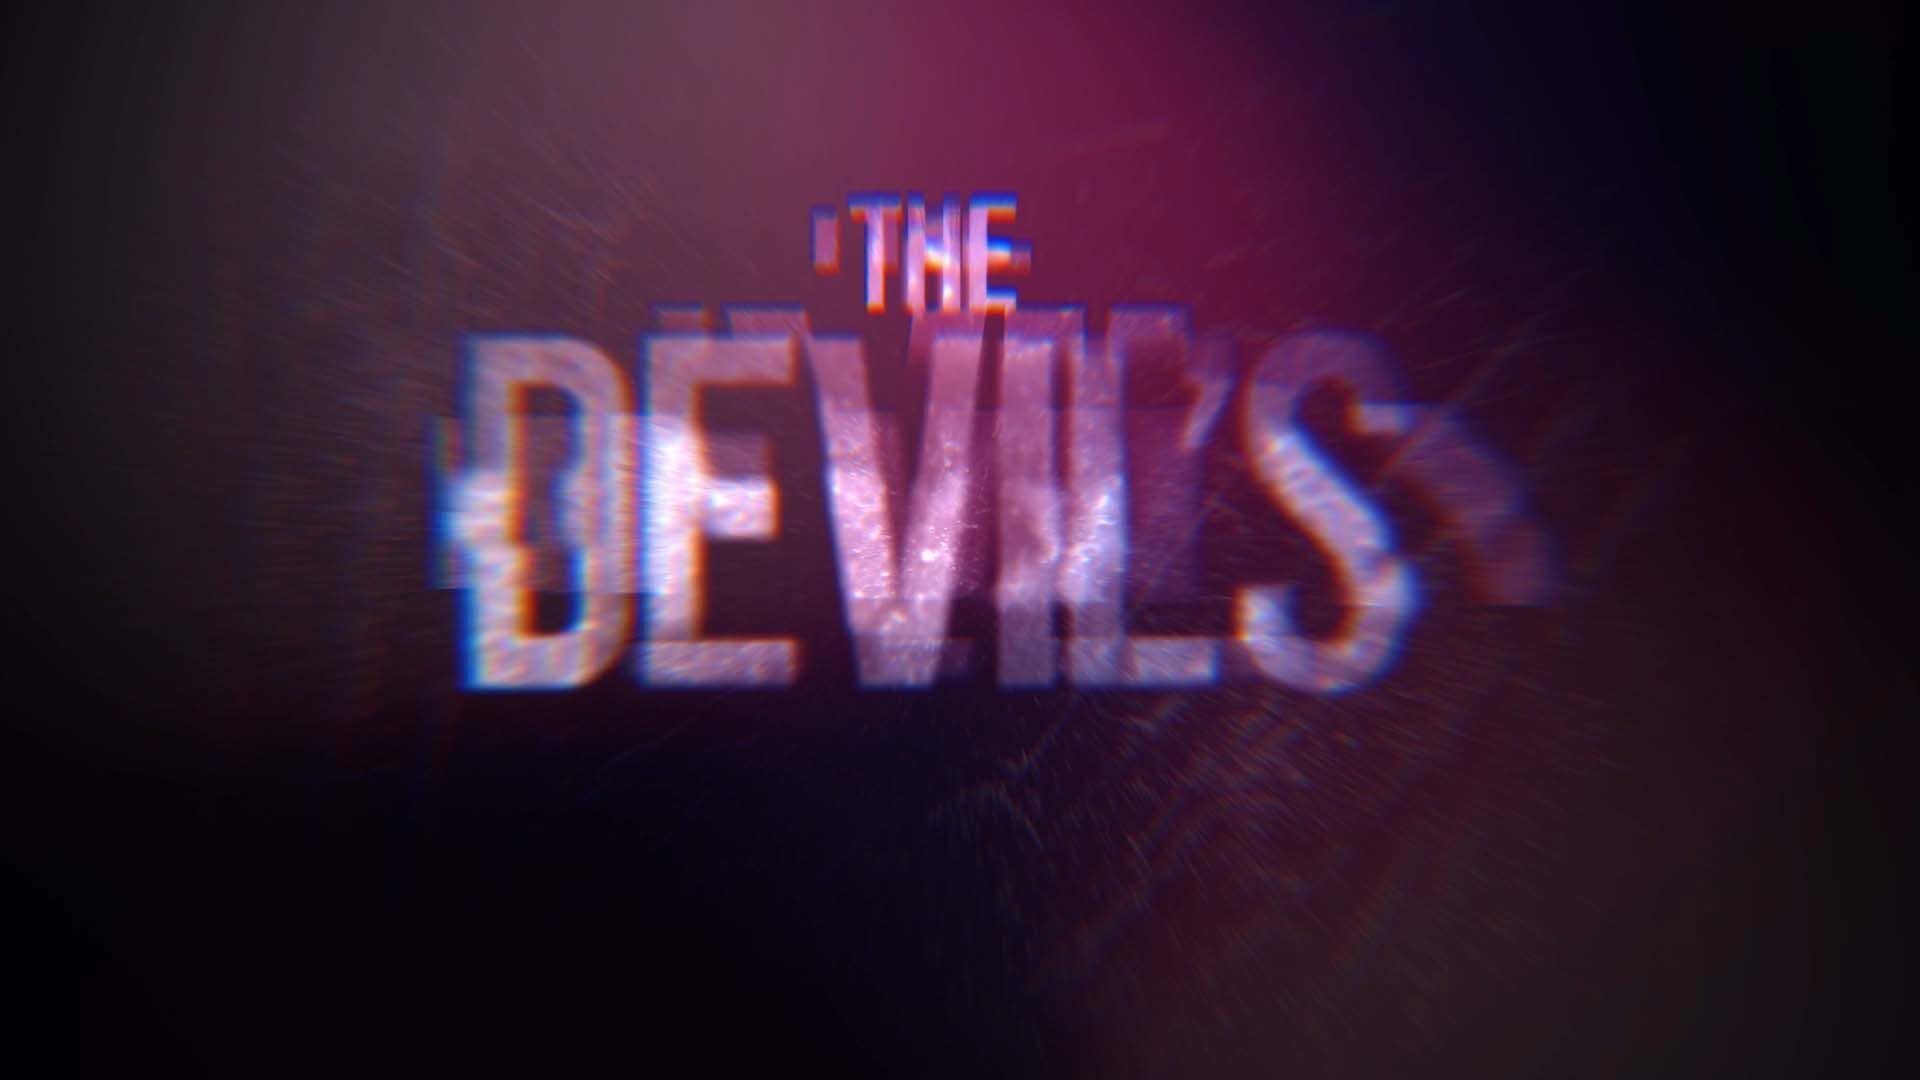 The Devil's Hour Title Sequence